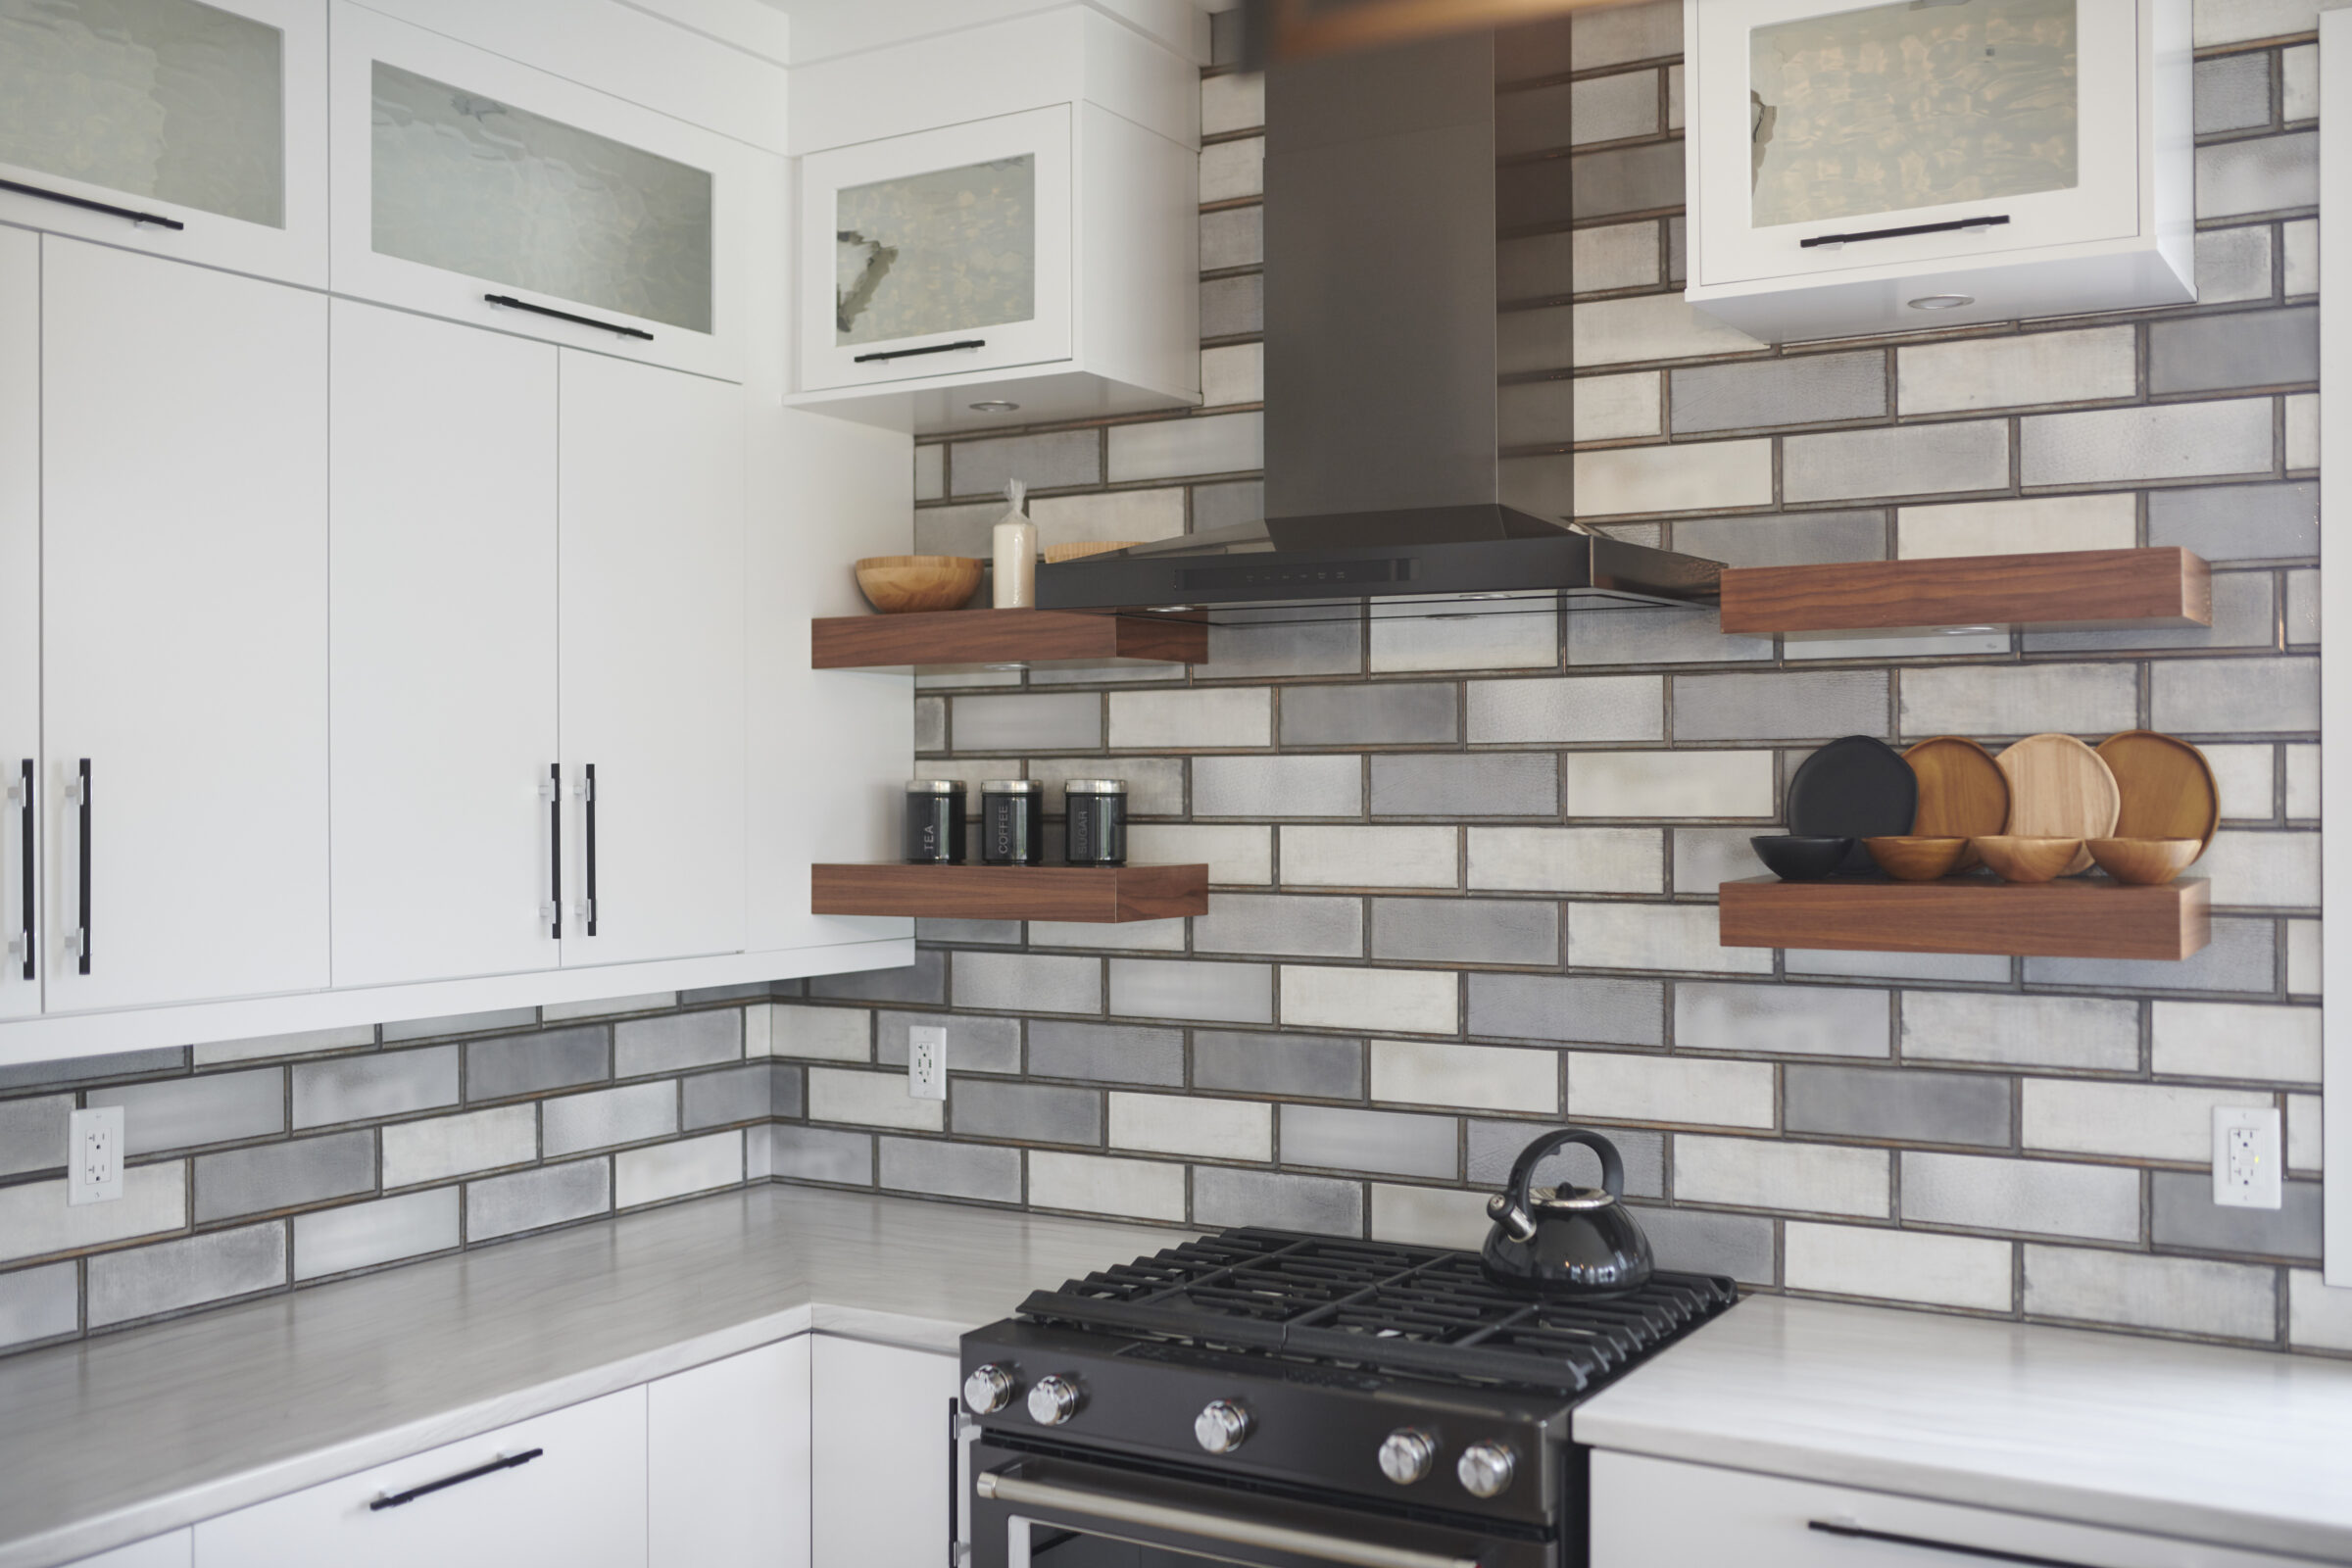 Modern kitchen interior with white cabinets, stainless steel appliances, subway tile backsplash, floating wooden shelves, and countertops without any person present.